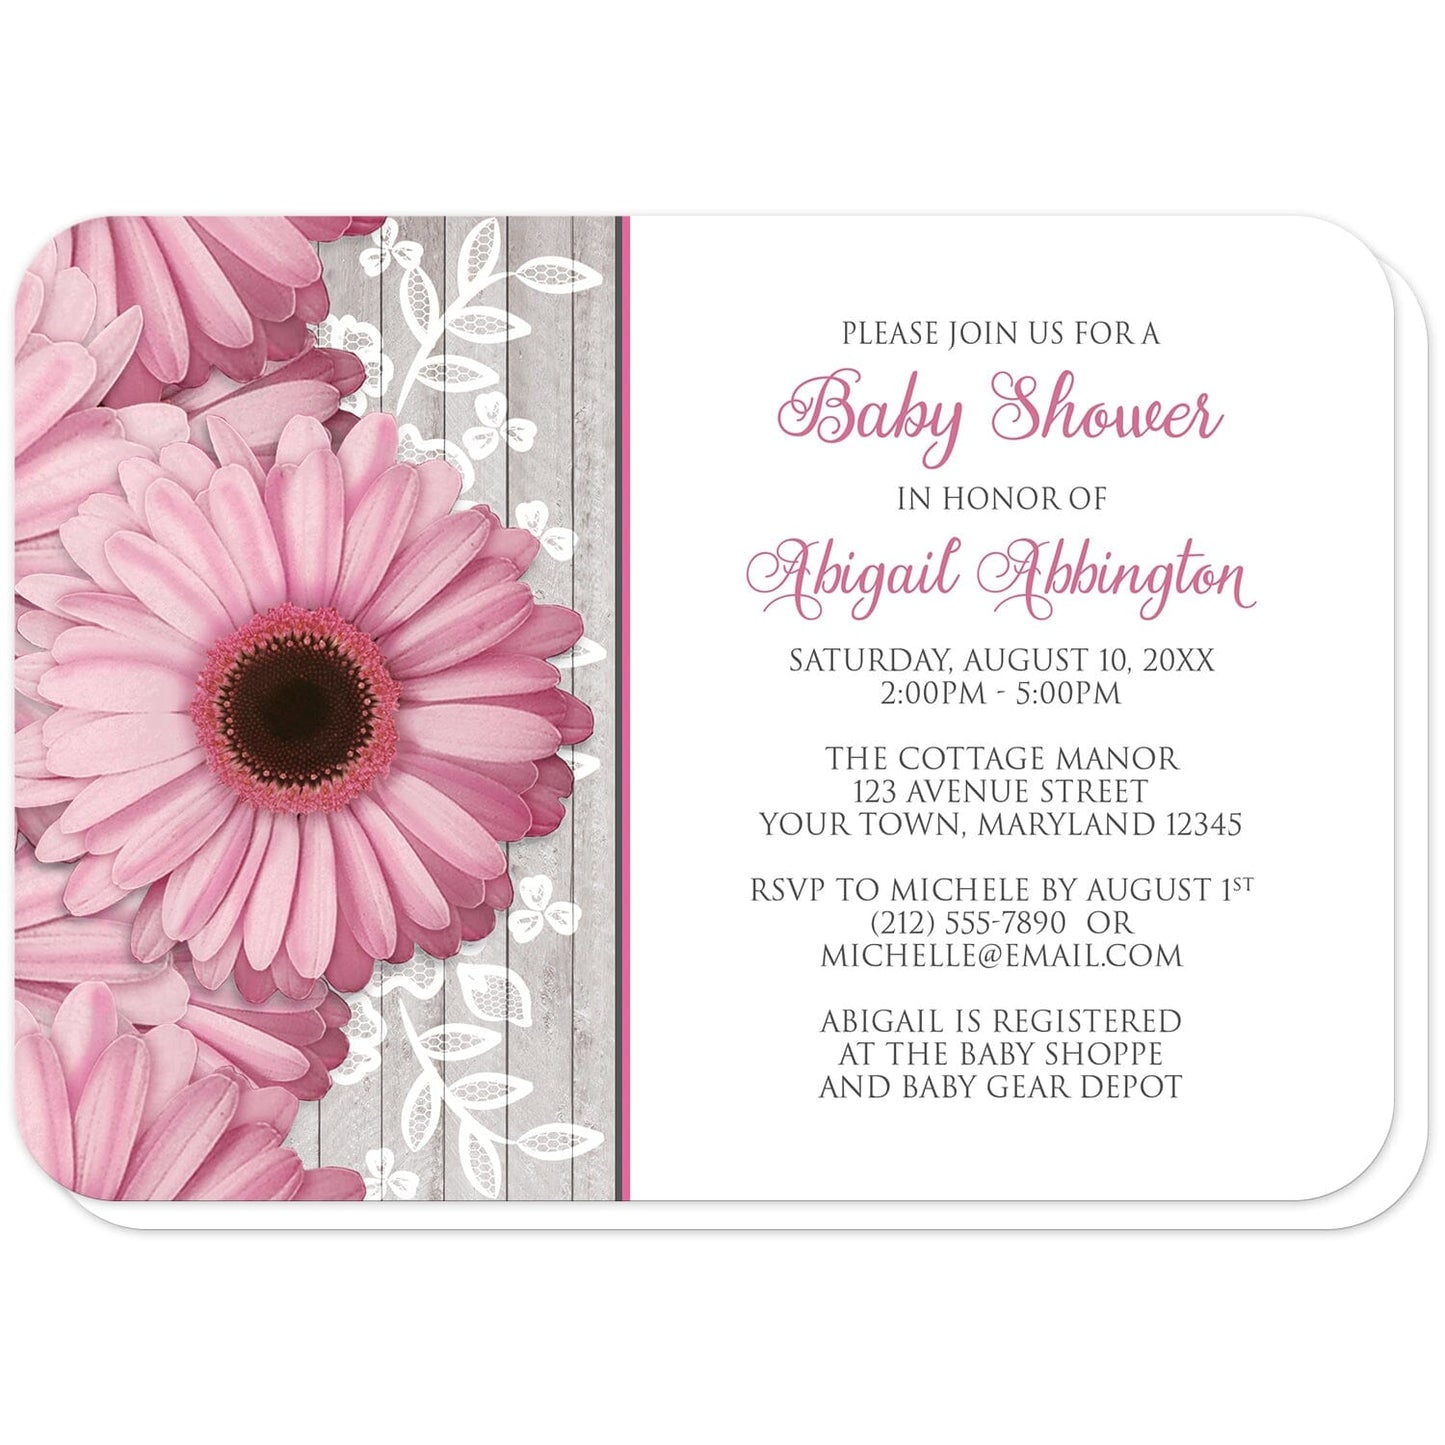 Rustic Pink Daisy Wood White Baby Shower Invitations (with rounded corners) at Artistically Invited. Rustic pink daisy wood white baby shower invitations designed with large and lovely pink daisy flowers with a white lace overlay over a light gray wood illustration along the left side. Your personalized baby shower celebration details are custom printed in pink and gray over a white background to the right of the pretty pink daisies.